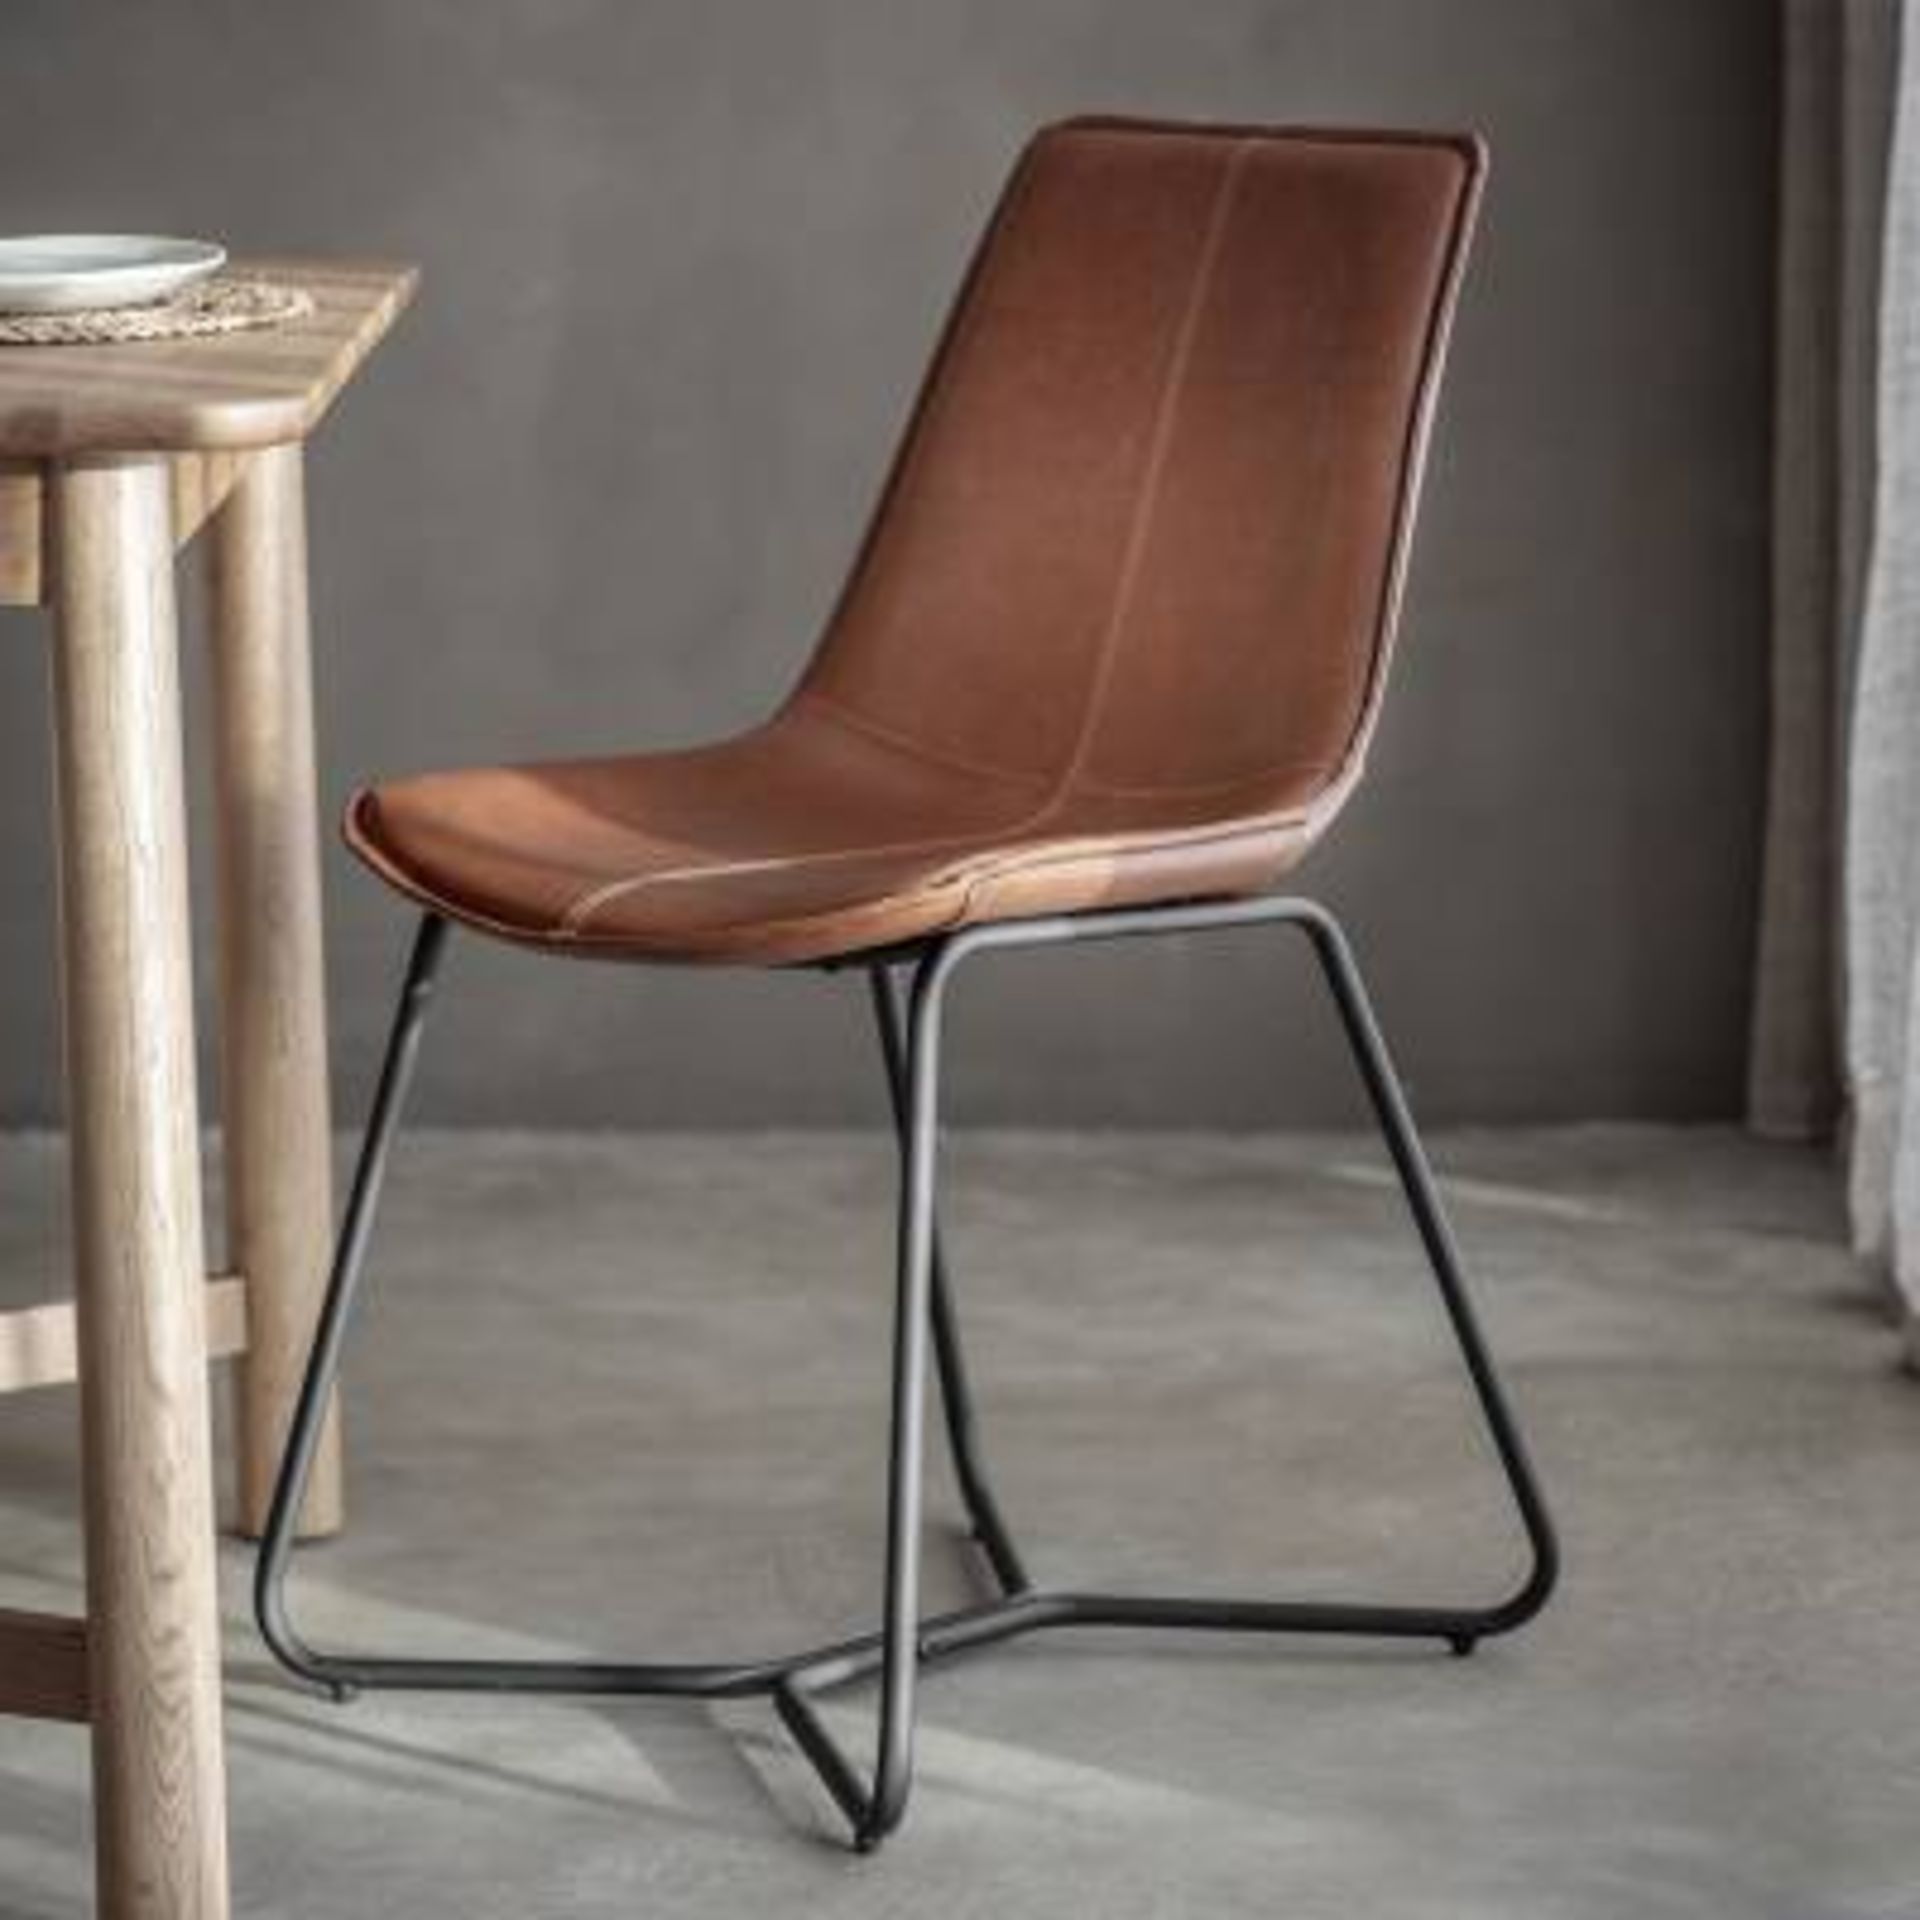 Newton Chair Brown 2 Pk Opulent Fau x Leather Seats Complimented By Metal Legs The Newton Chair